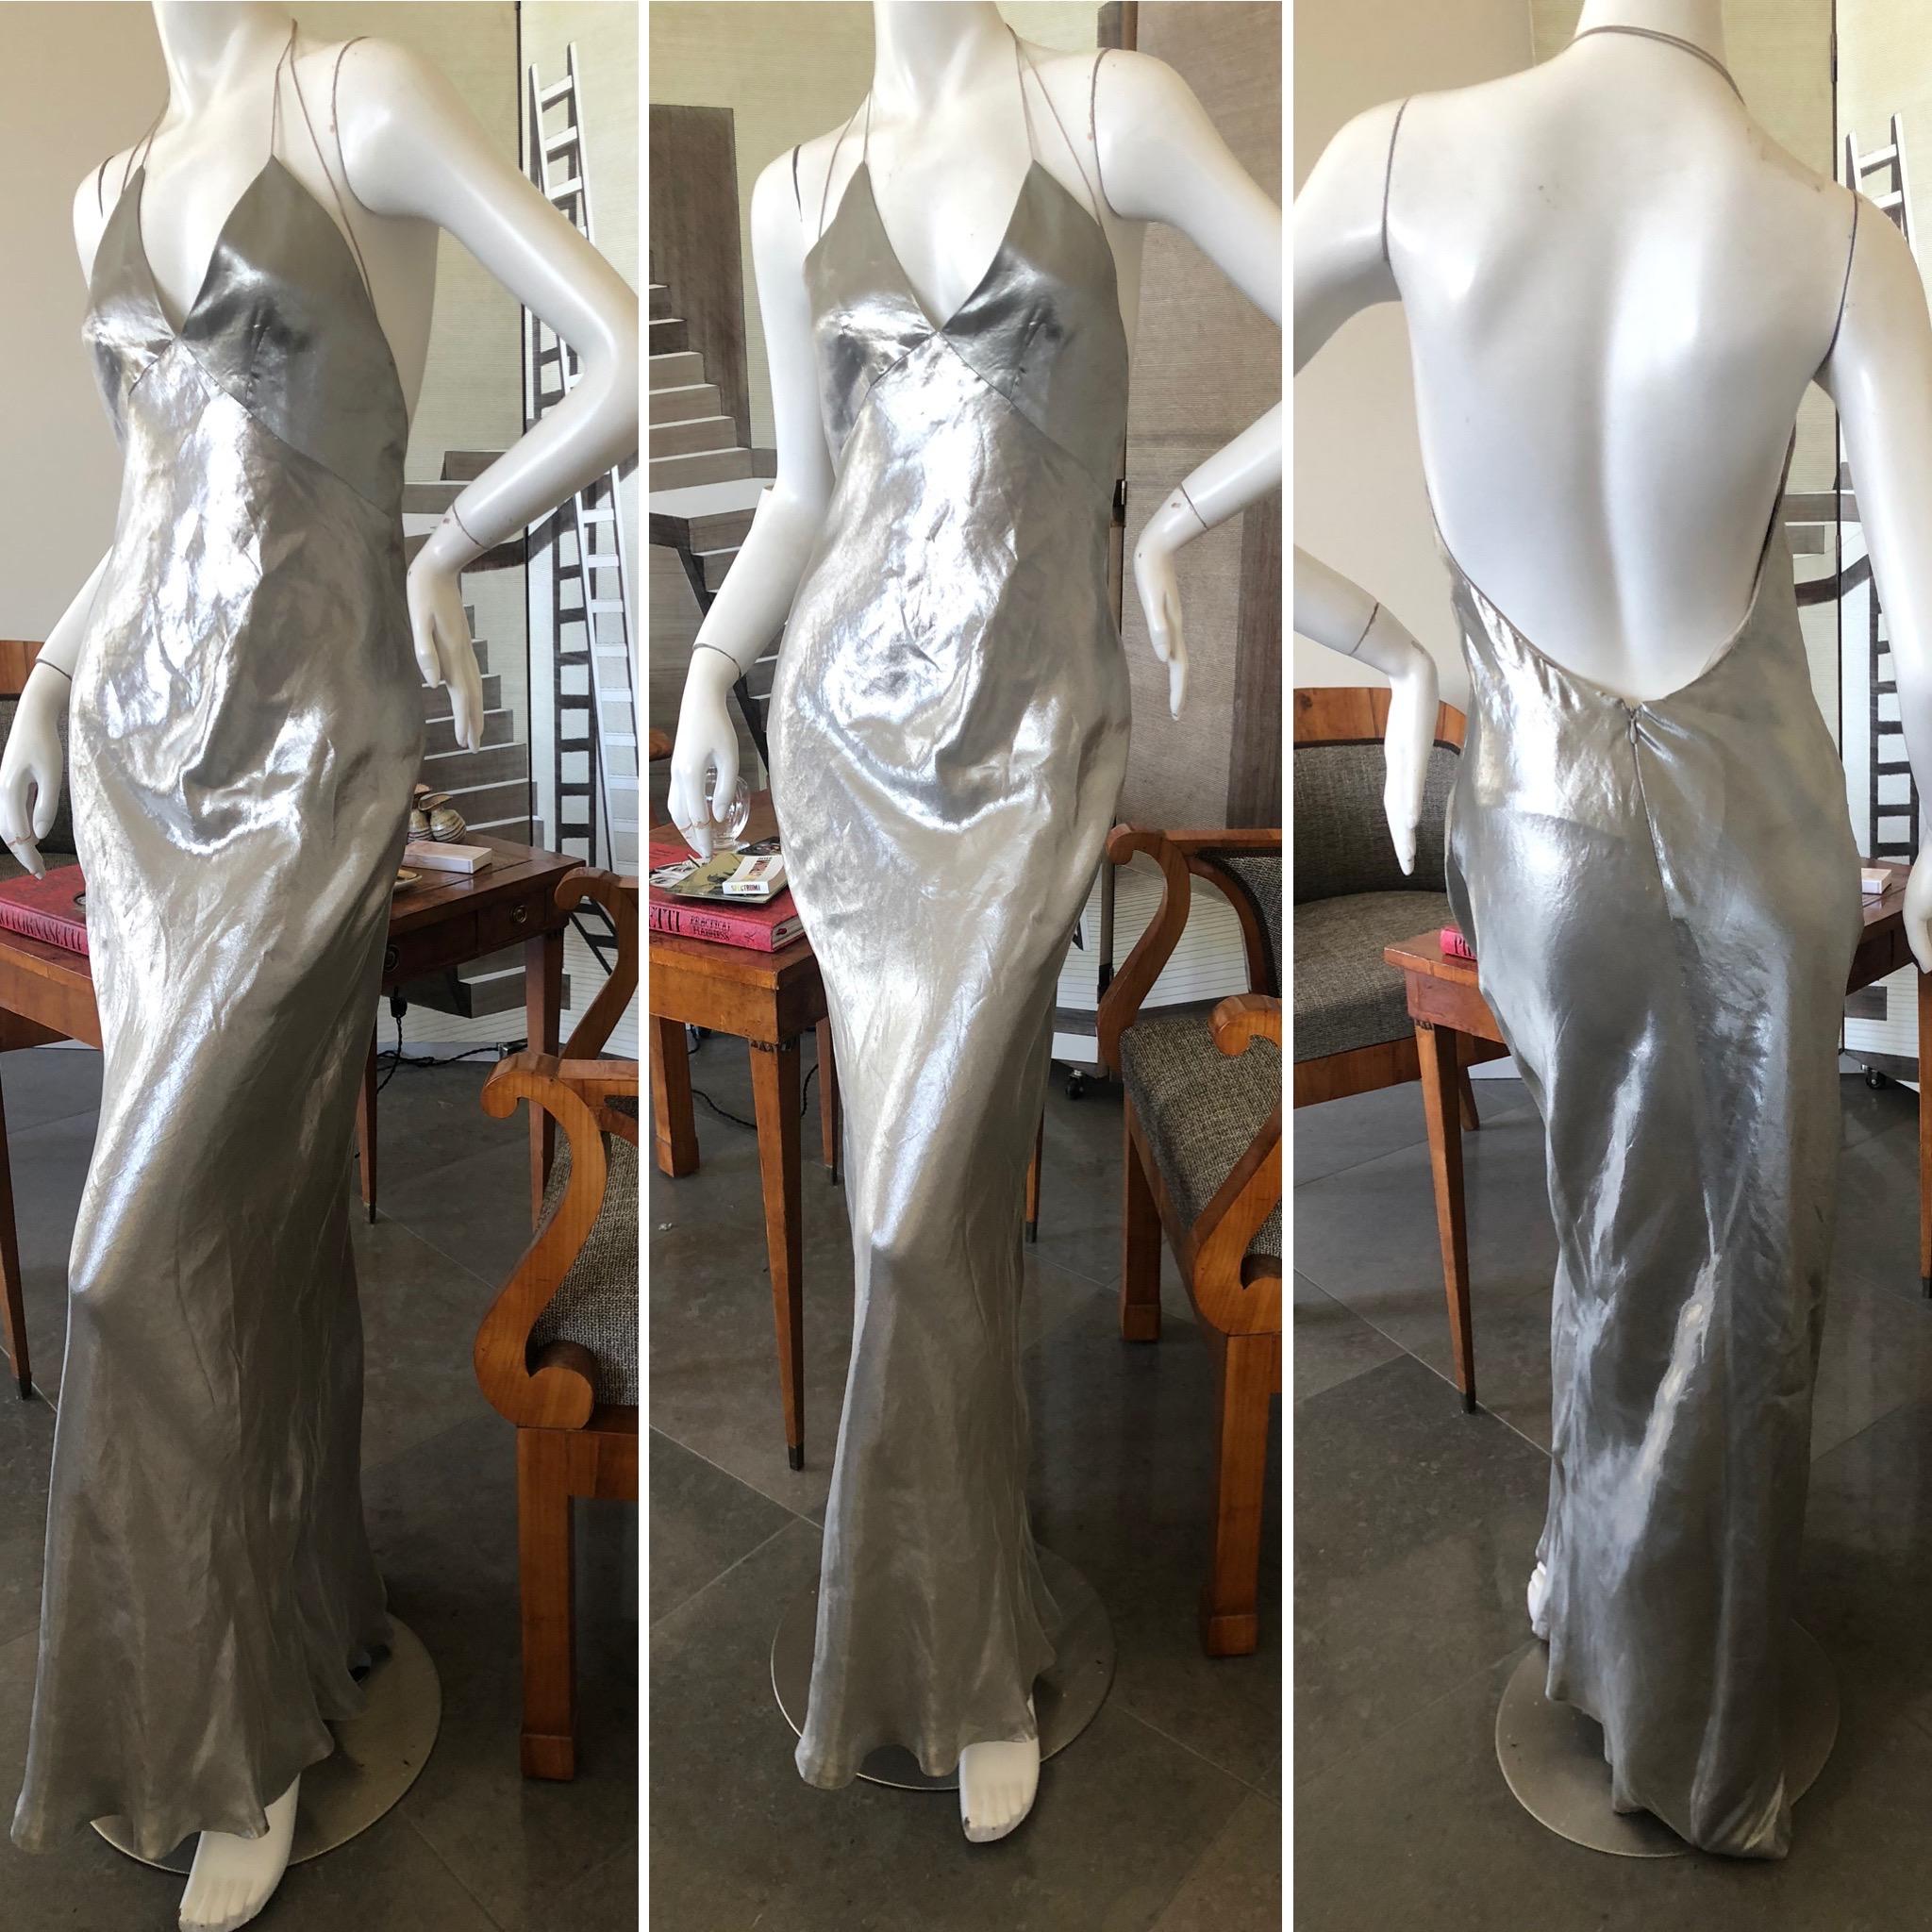 Marc Jacobs Collection Silver Silk Siren Hollywood Goddess Gown.
So pretty, the fabric is silk with metal, and is so lustrous it shimmers as you walk.
Bust 35